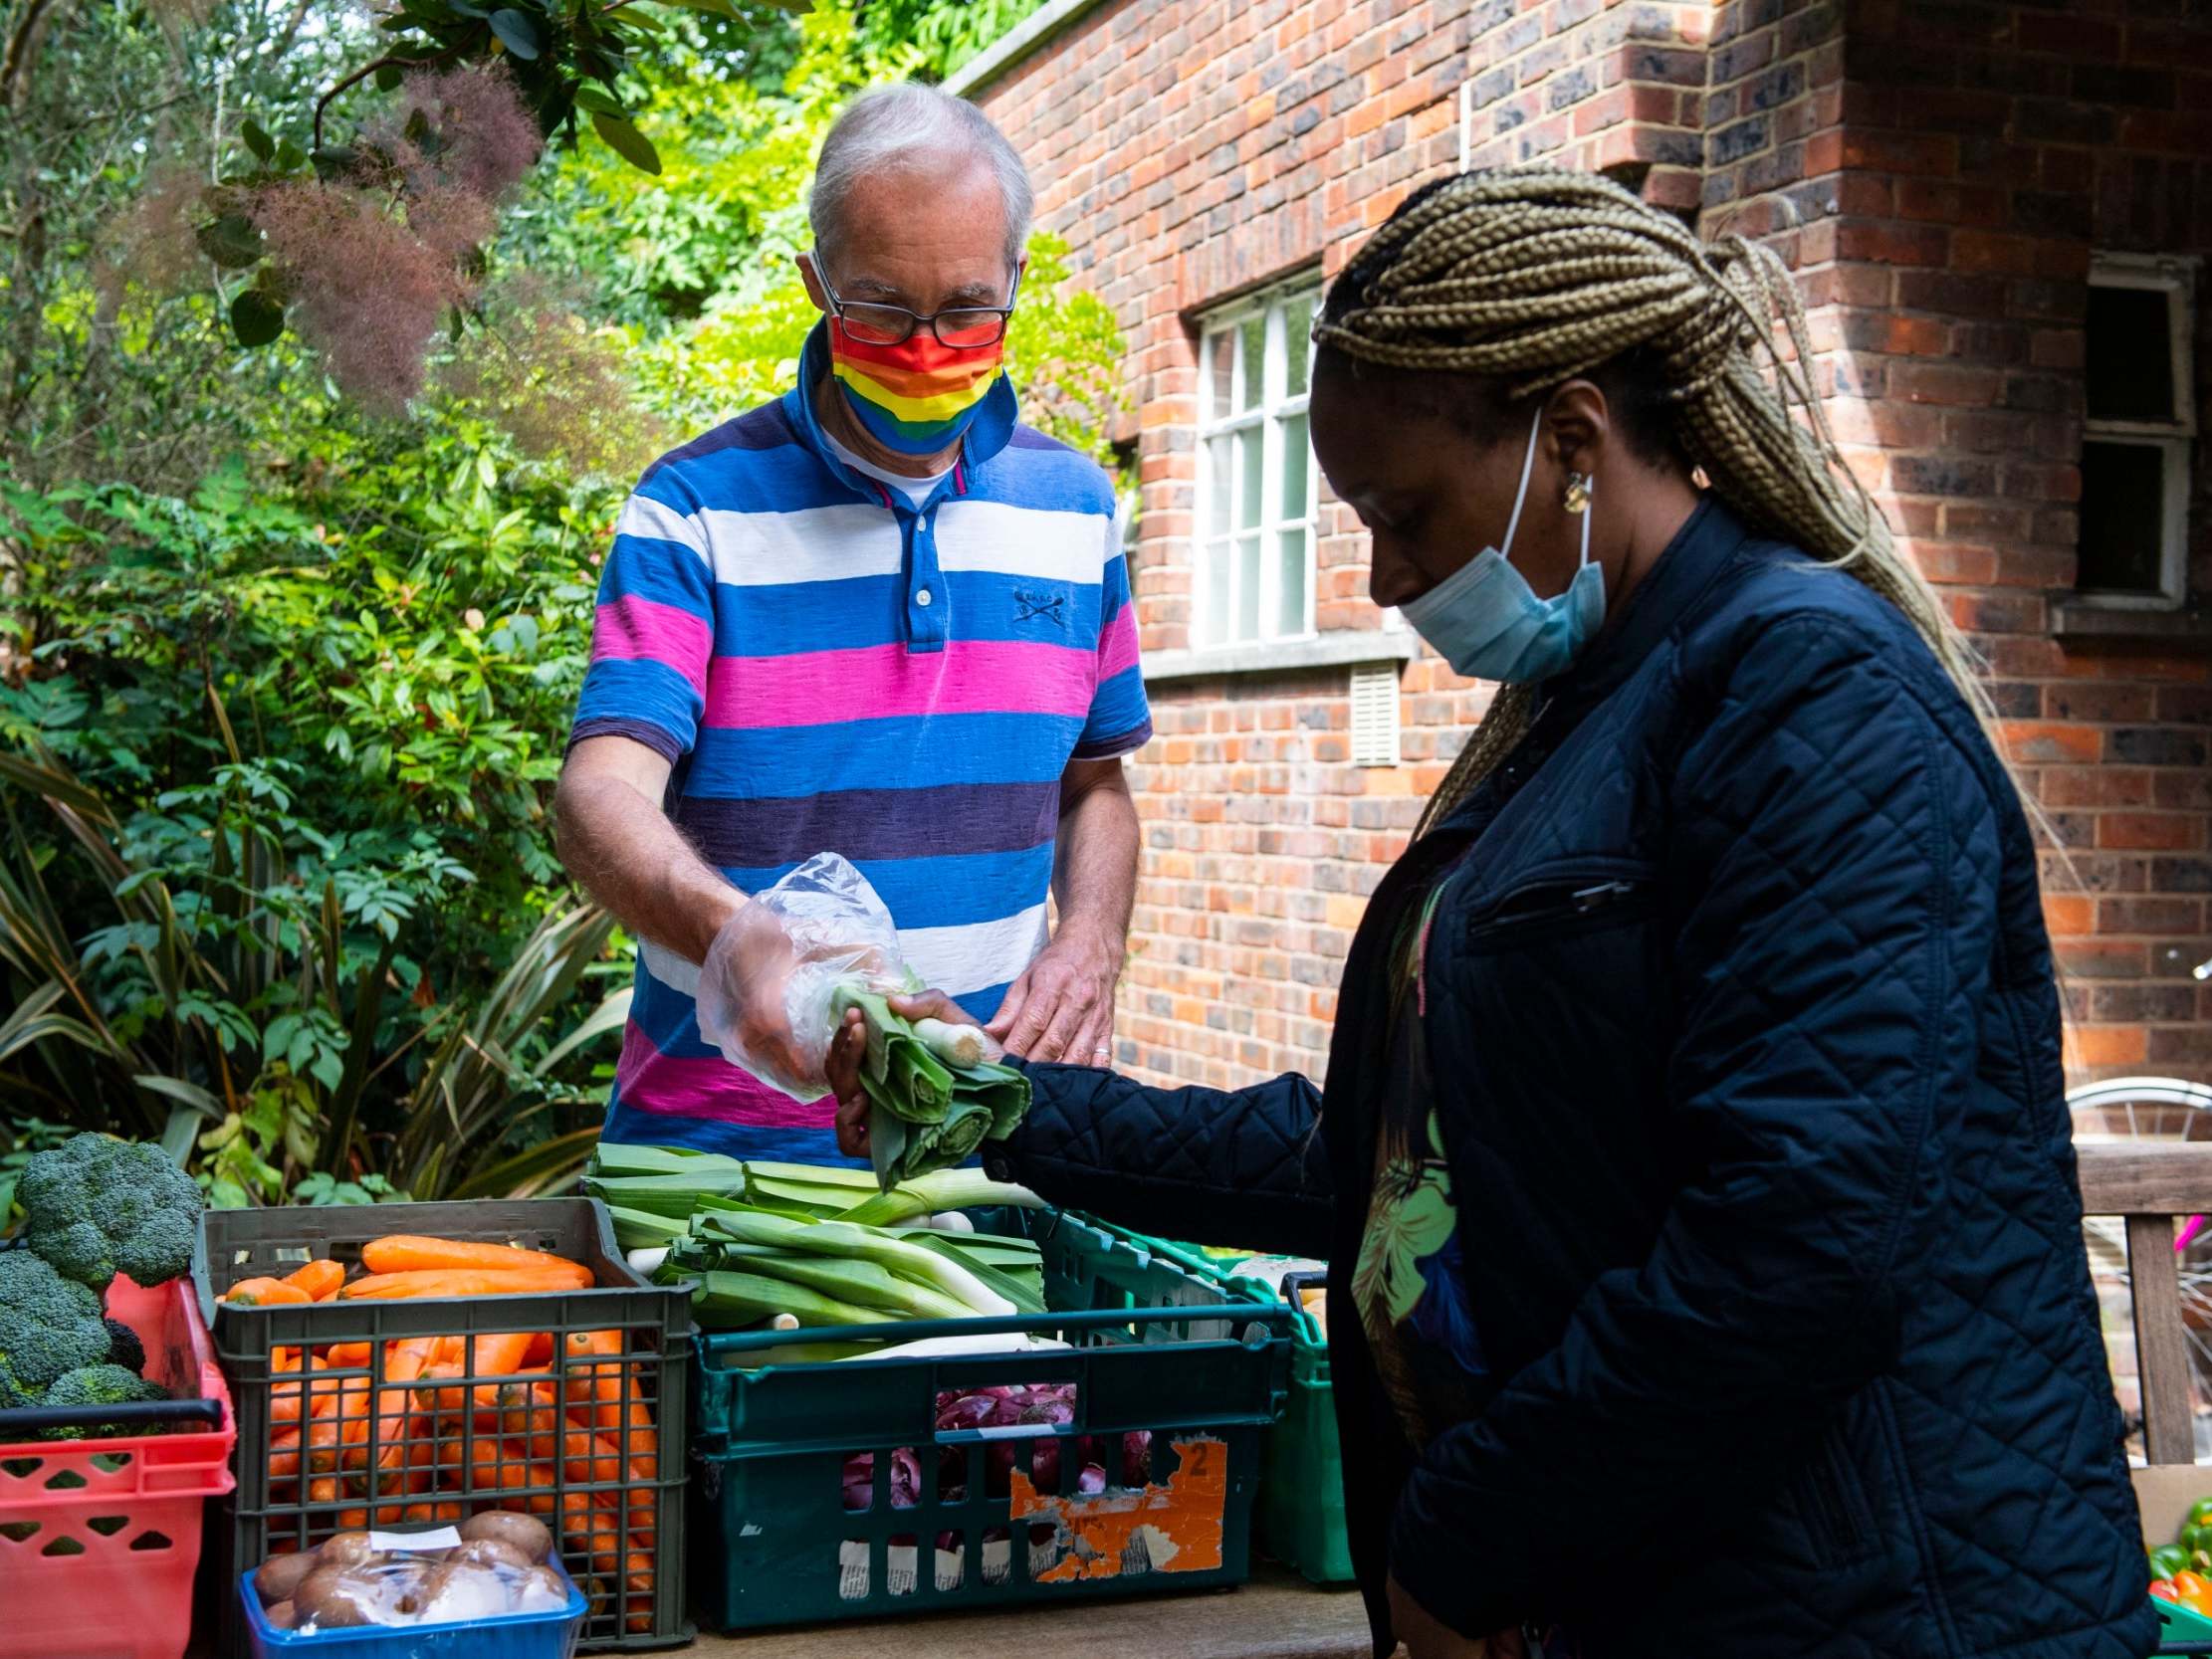 Food is handed out to those in need at West London Welcome in Hammersmith